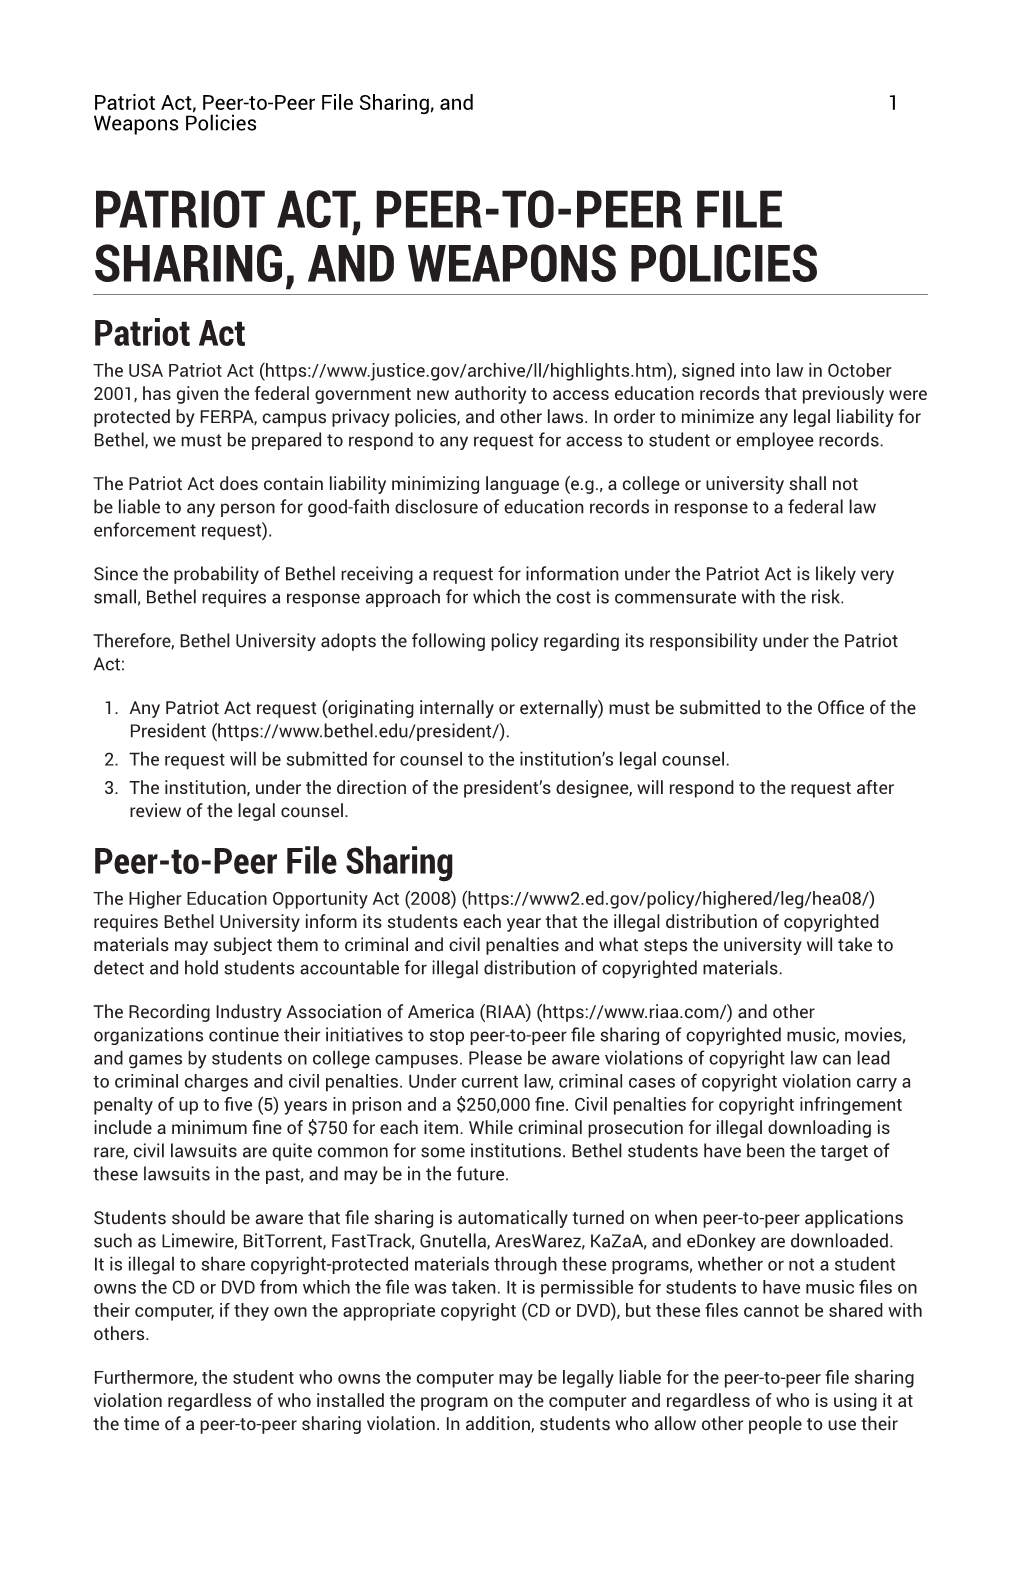 Patriot Act, Peer-To-Peer File Sharing, and Weapons Policies